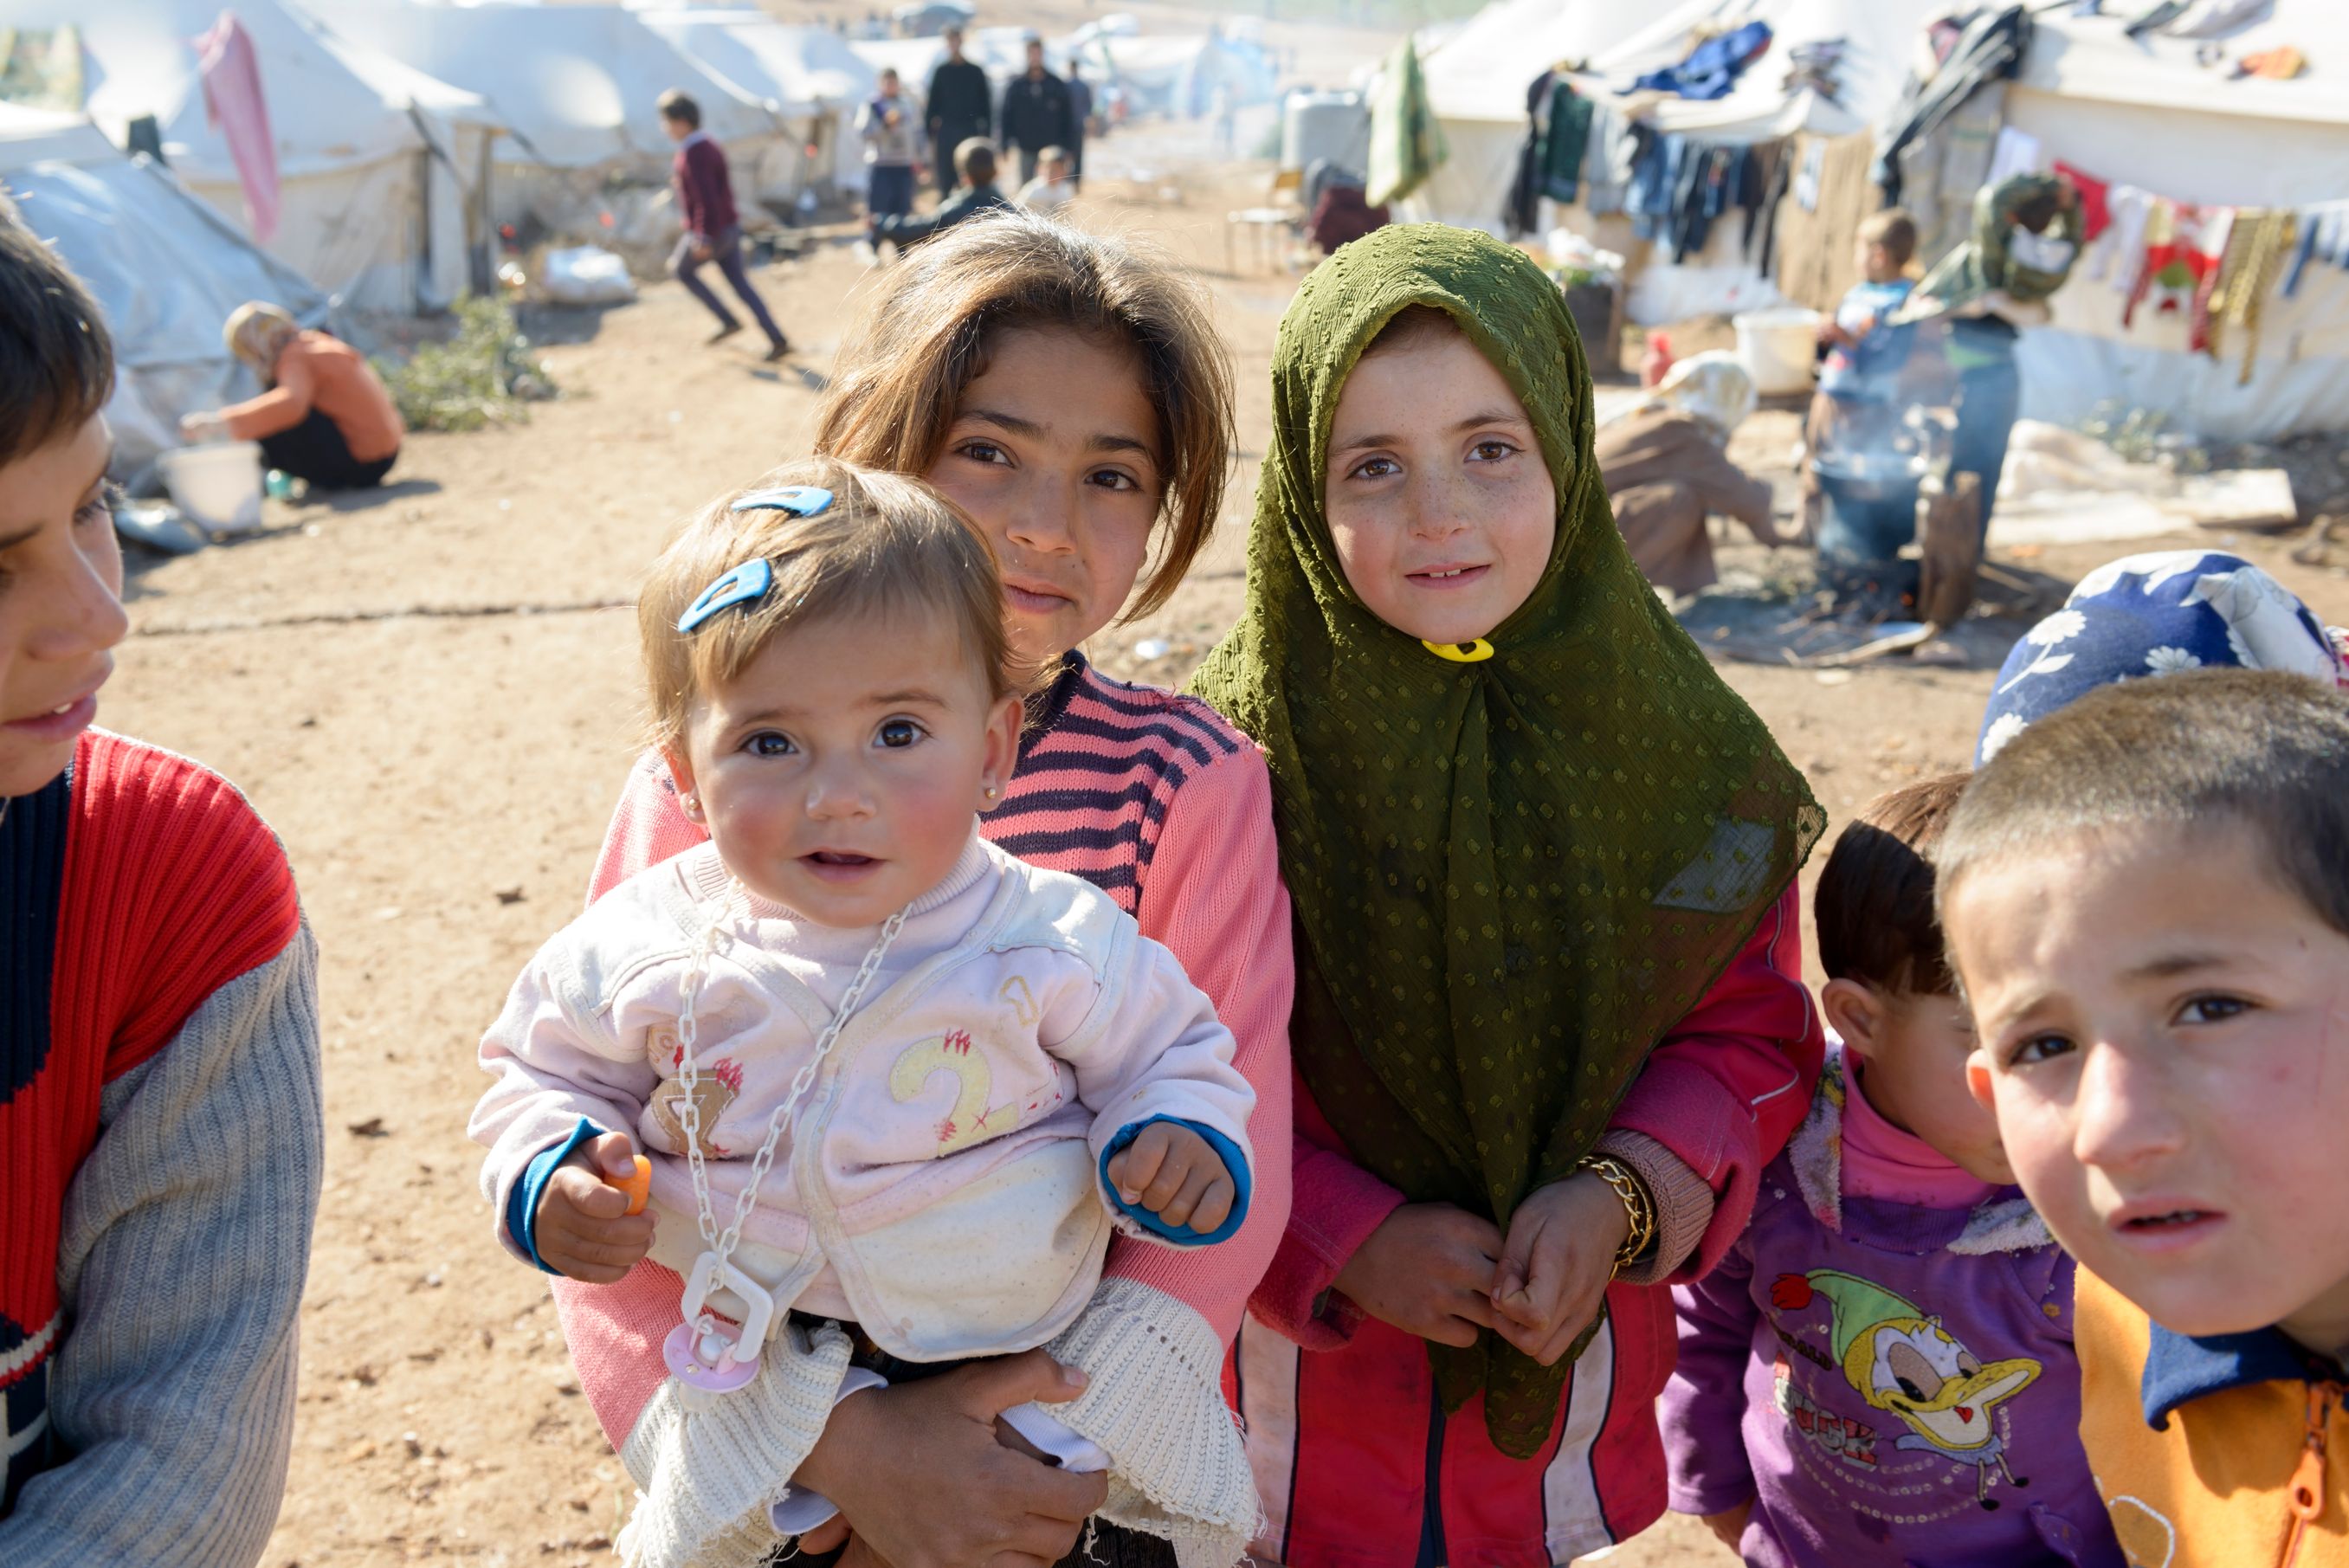 Atmeh, Syria - January 14, 2013: Internally displaced Syrians, including children, at a refugee camp near the Turkish border in Atmeh, Syria